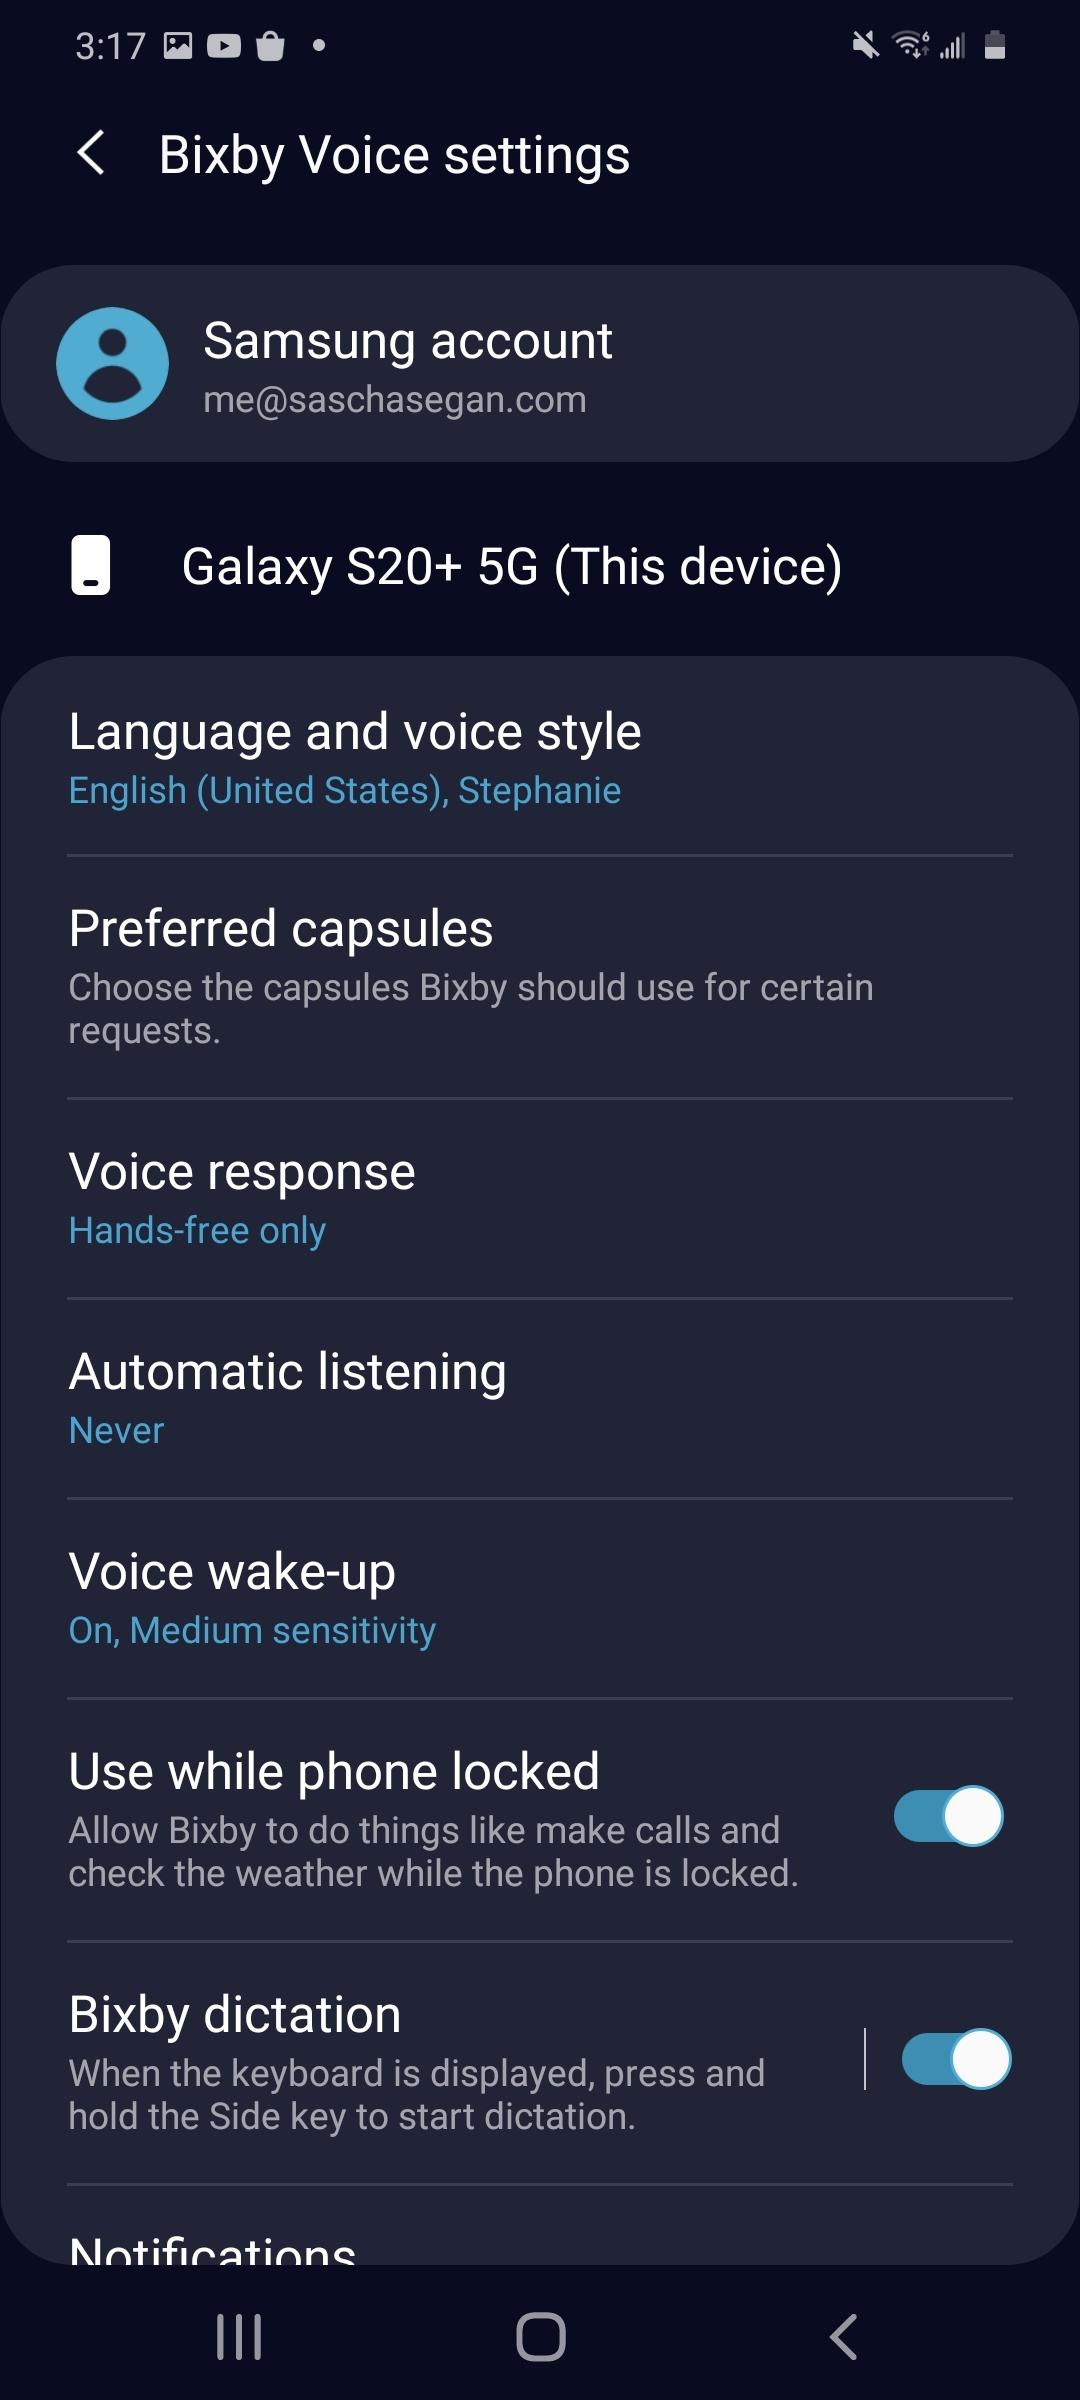 How To: Completely Disable Bixby on Your Samsung Galaxy 